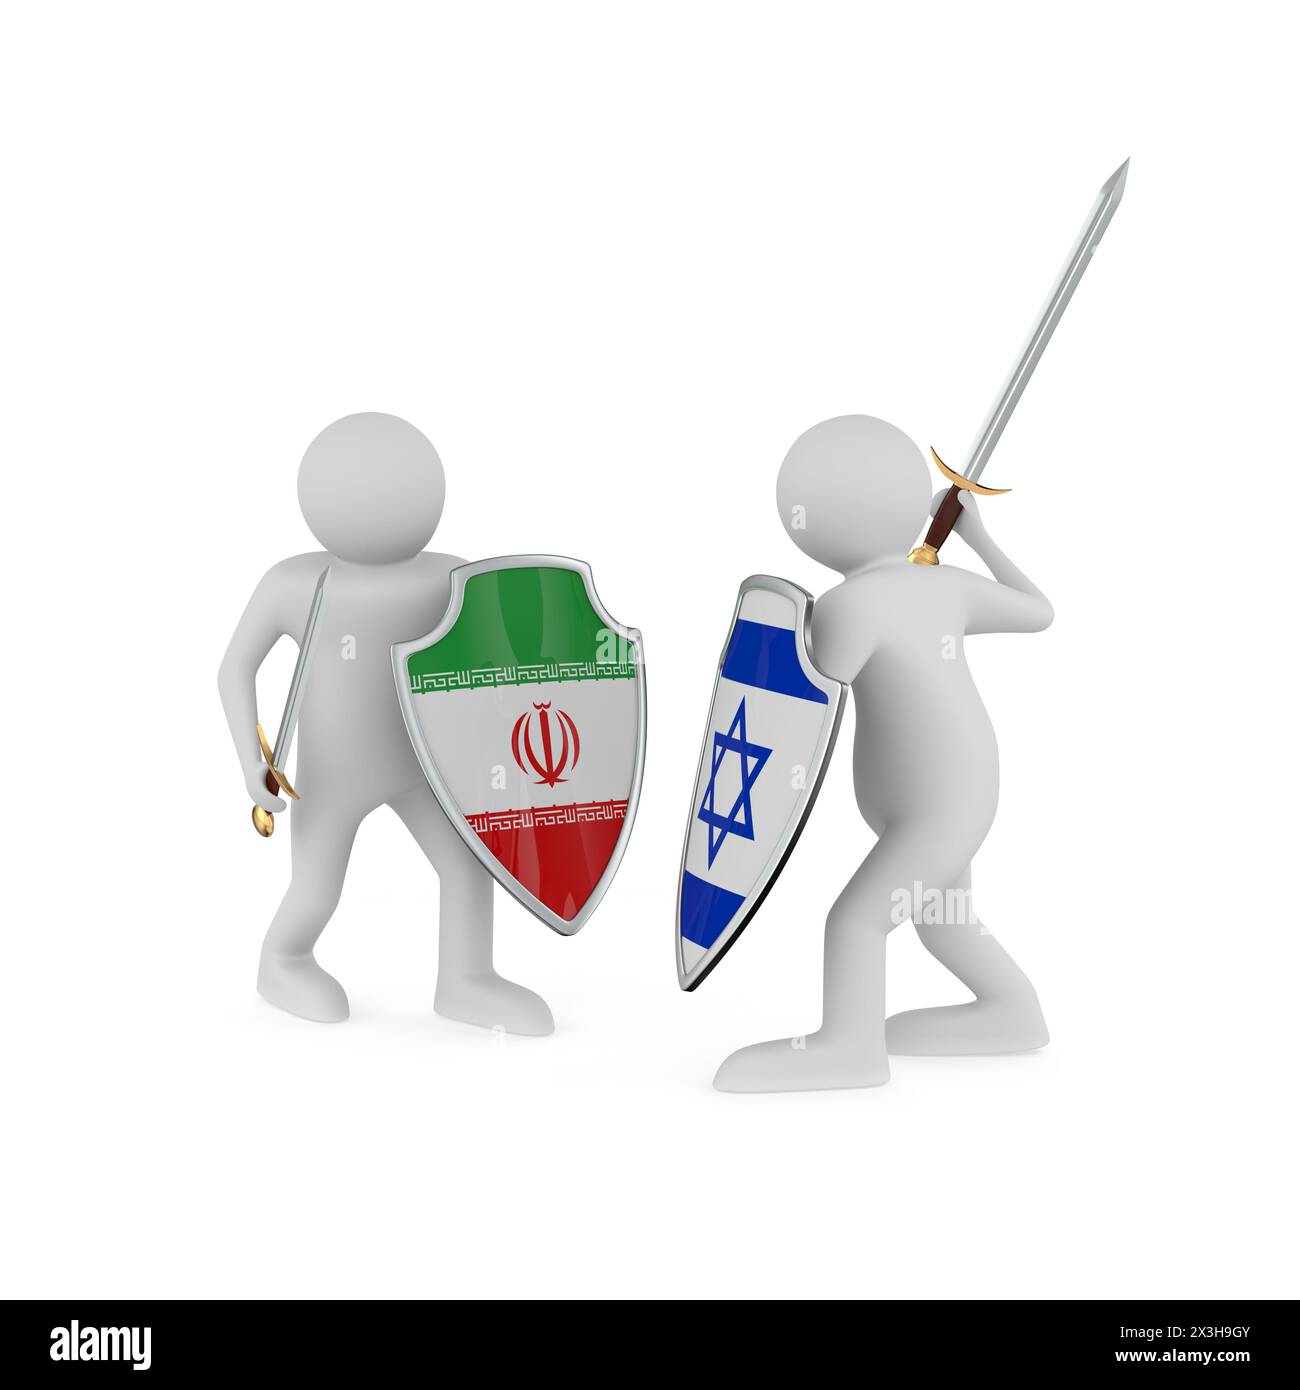 War between Iran and Israel. Isolated 3D illustration Stock Photo